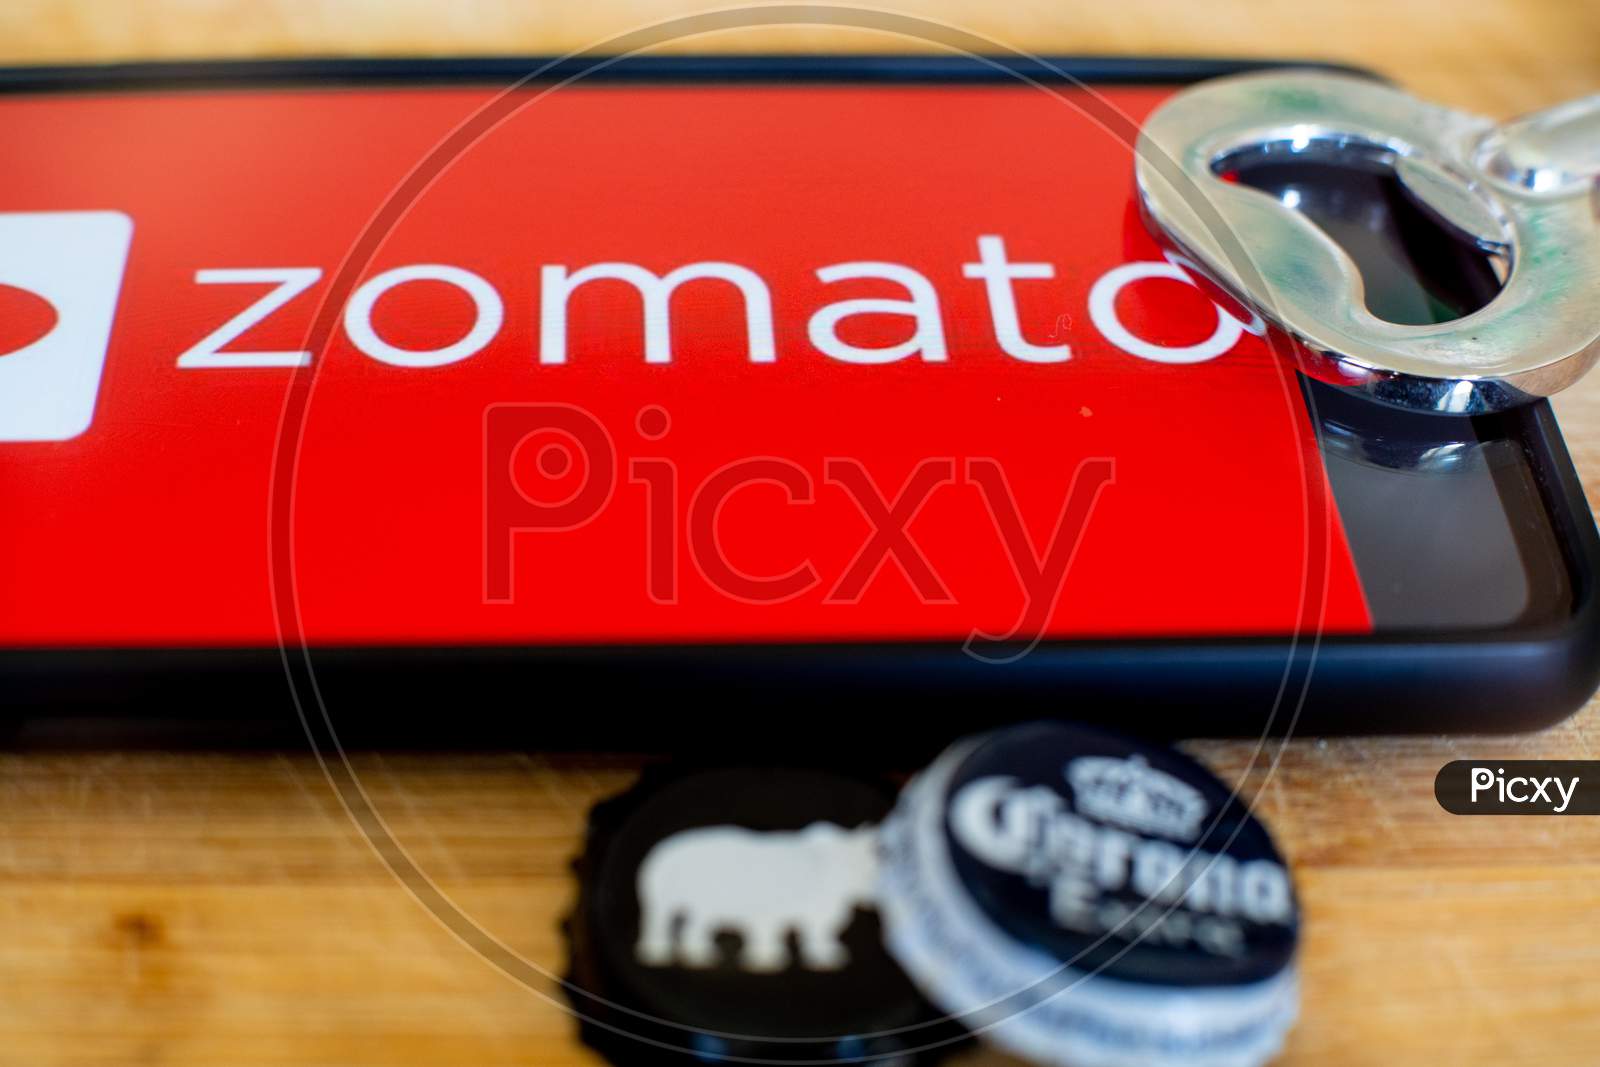 Mobile Phone Showing Zomato On A Wooden Platform With Beer Bottle Caps And An Opener On The Side